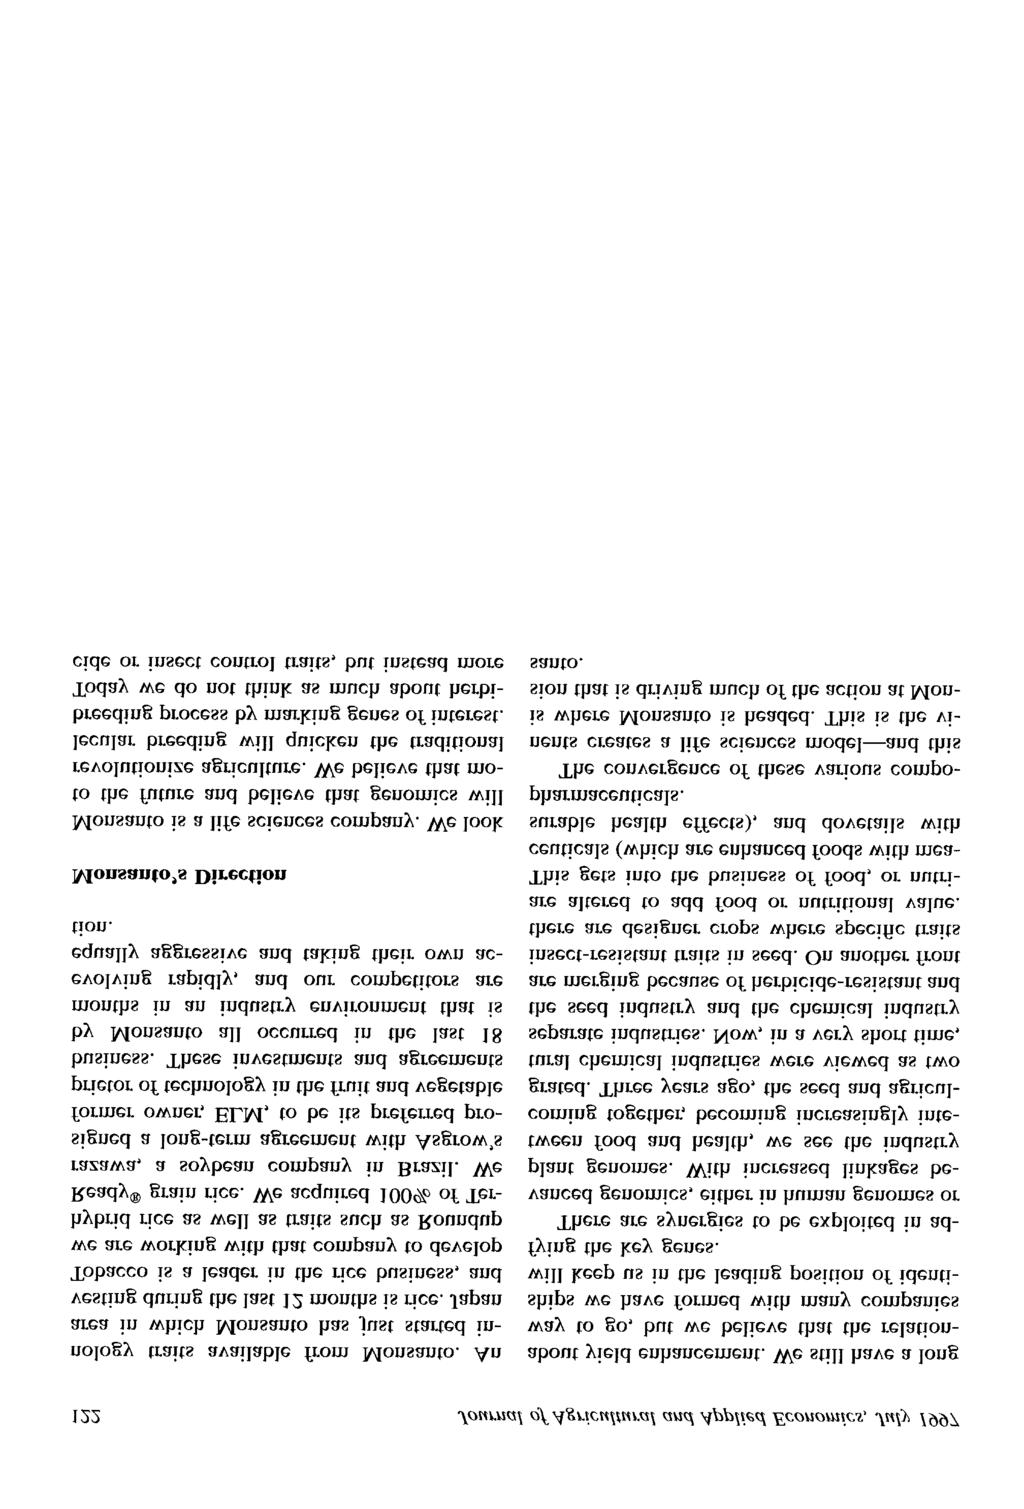 122 Journal of Agricultural and Applied Economics, July 1997 nology traits available from Monsanto. An area in which Monsanto has just started investing during the last 12 months is rice.